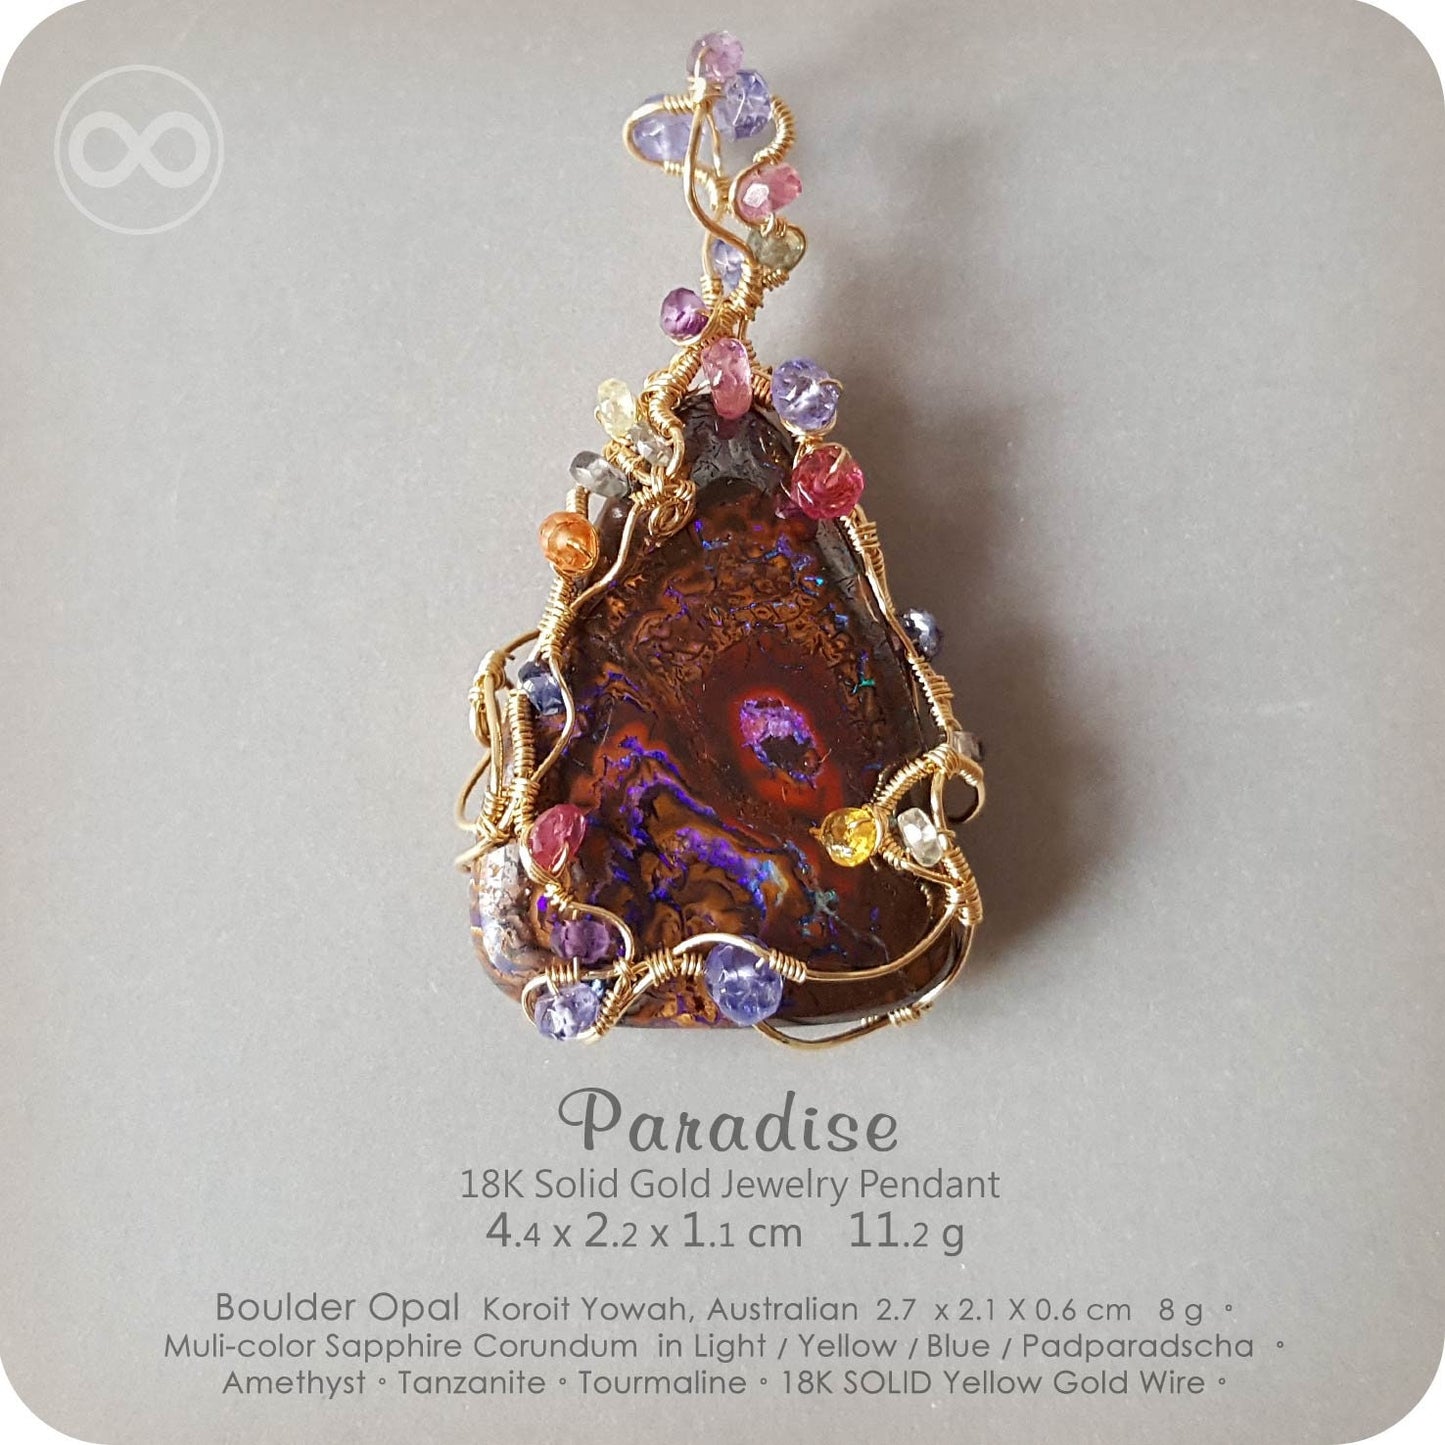 Boulder Opal PARADISE 18K SOLID Gold Jewelry Pendant - H88